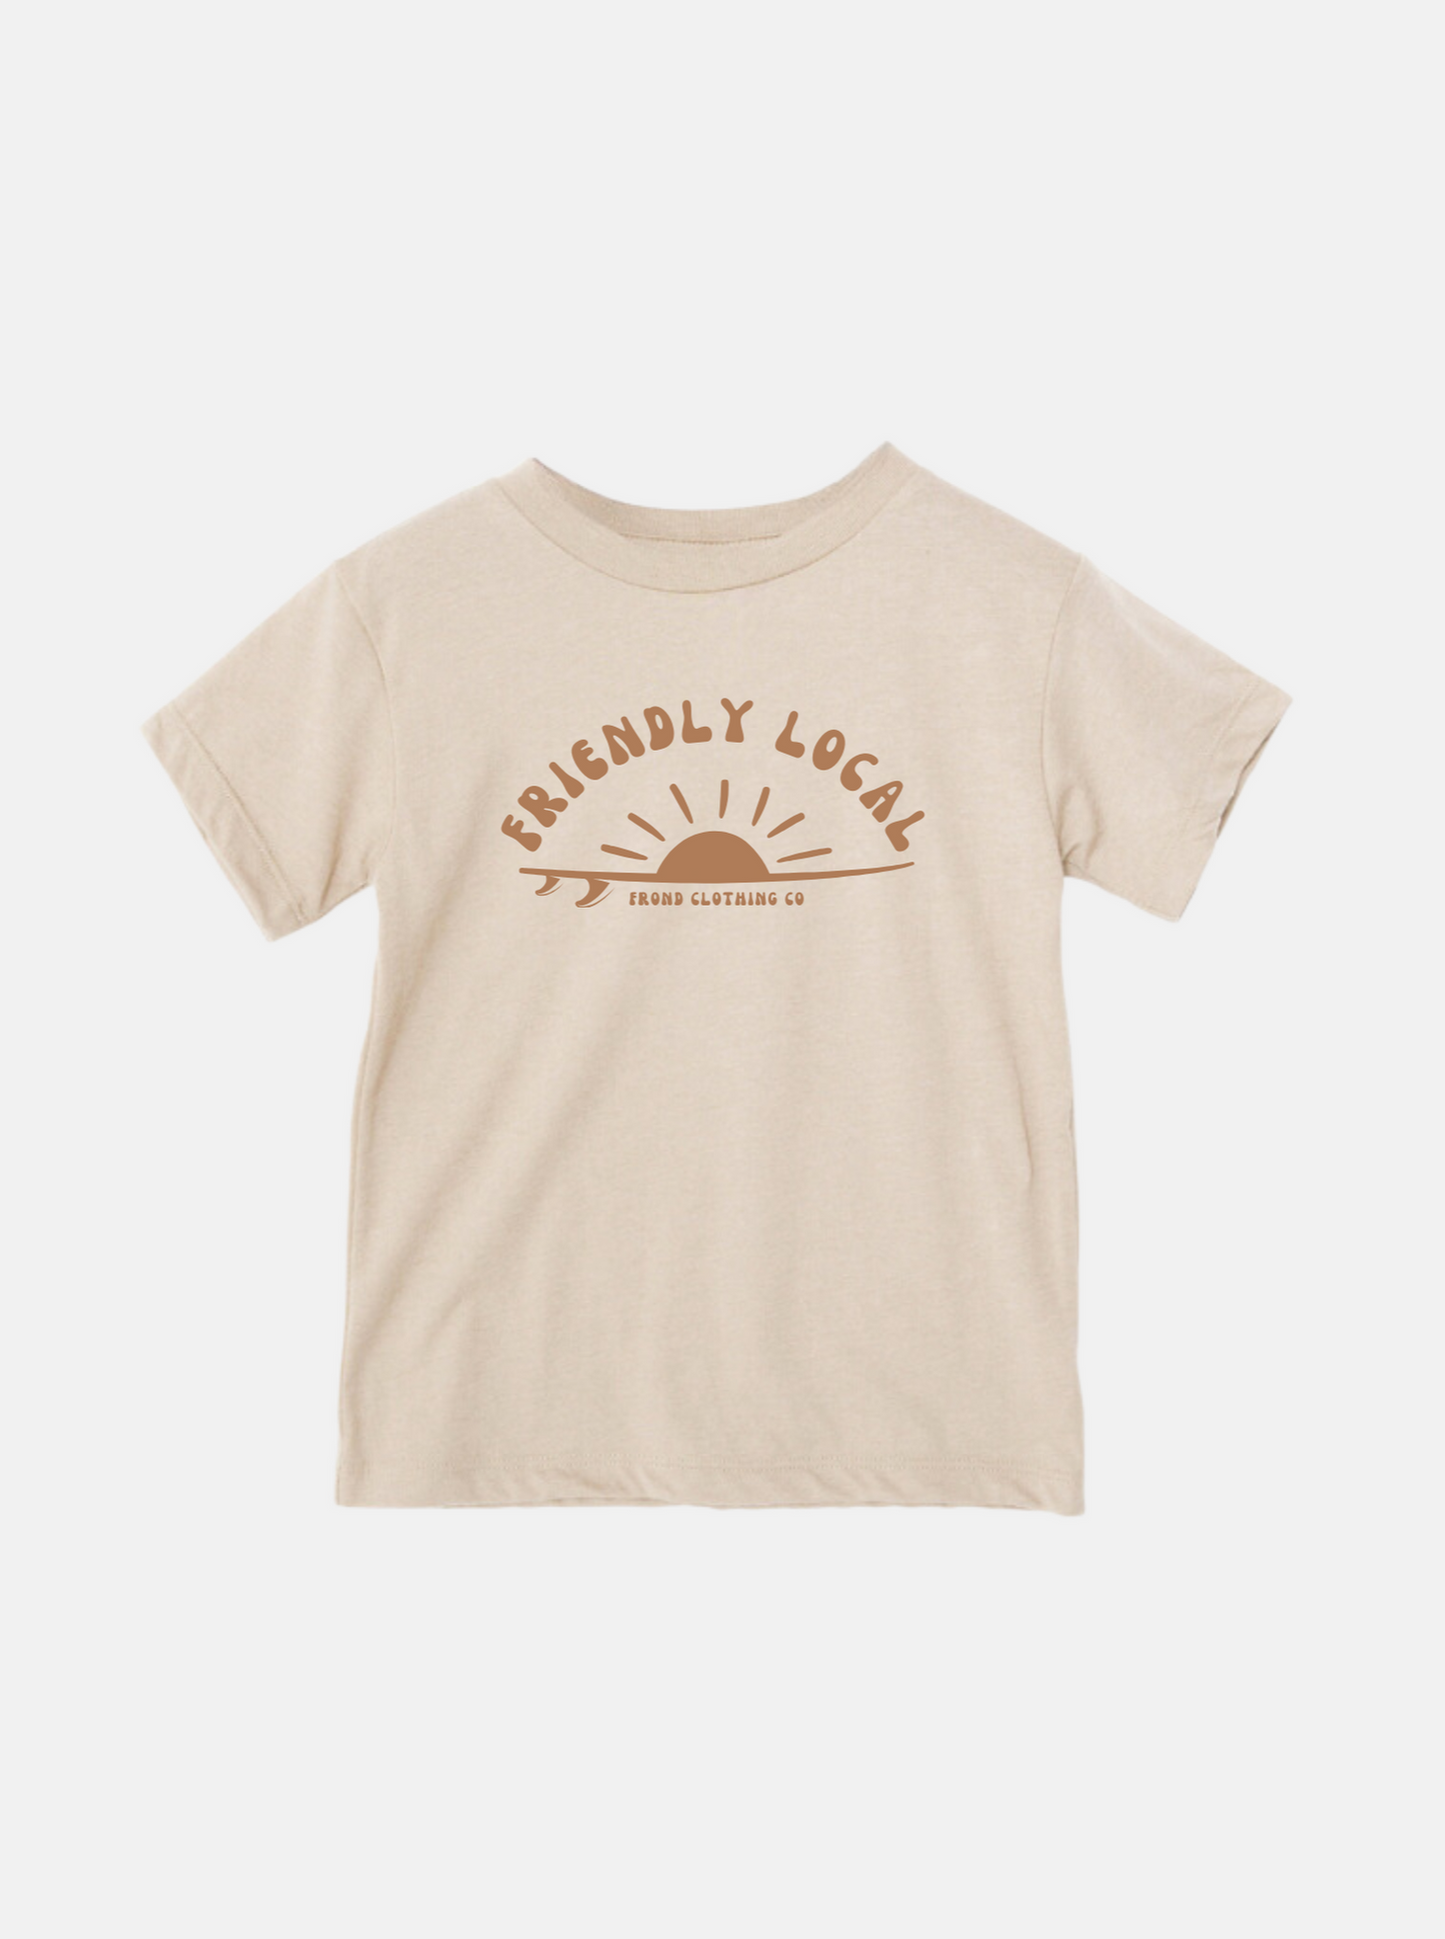 Friendly Local Toddler Tee, Dust